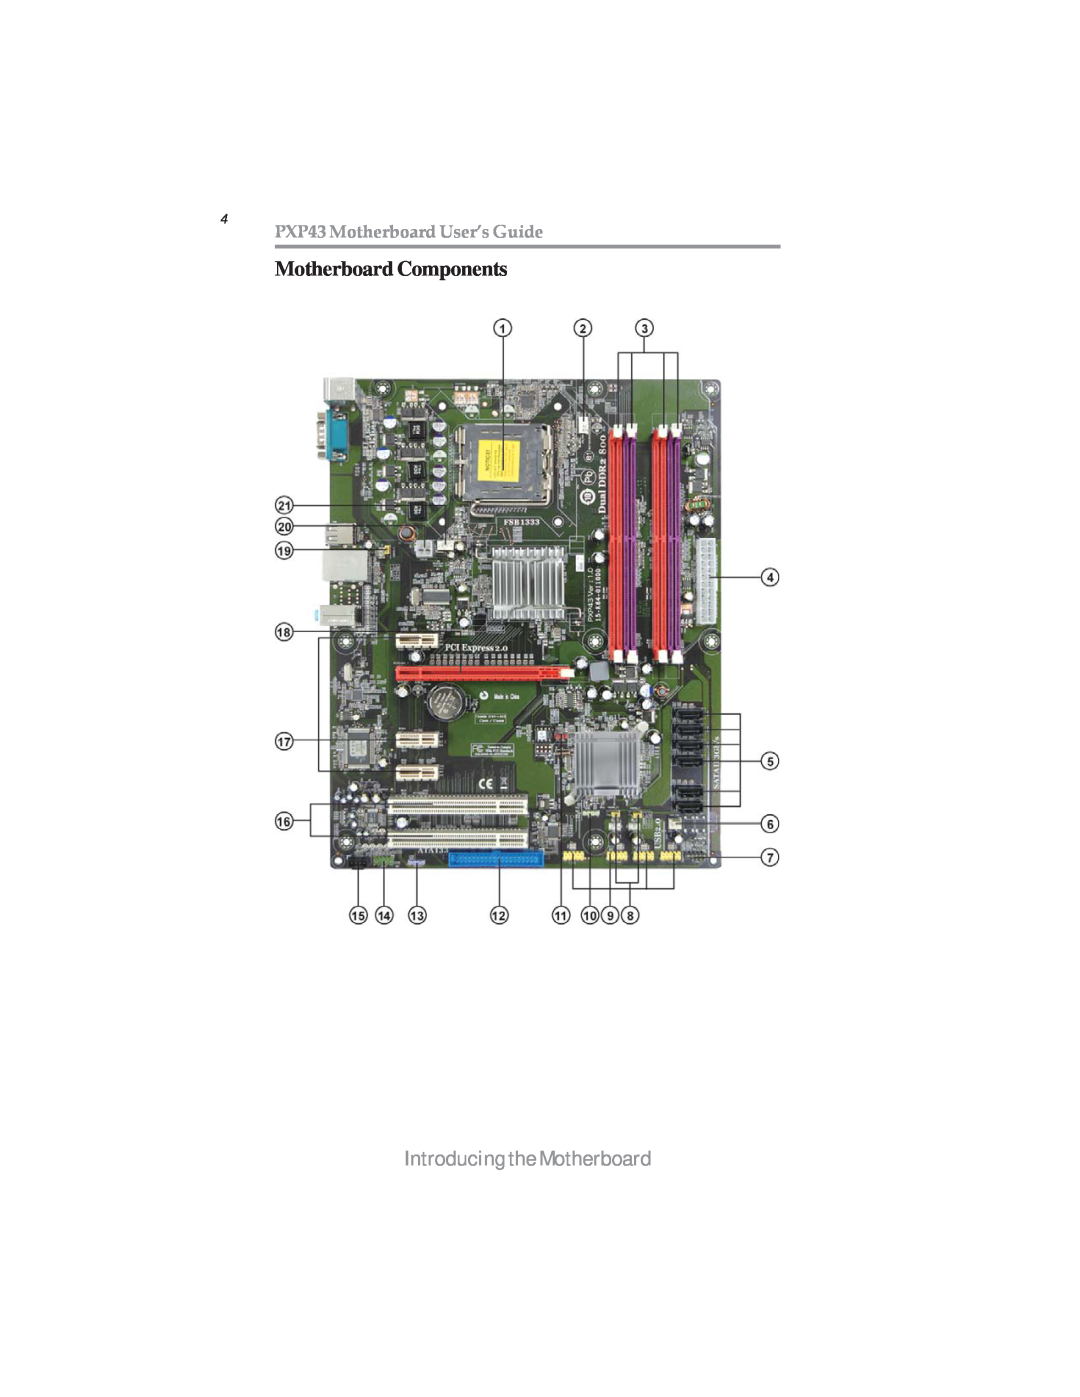 Microsoft manual Motherboard Components, 4 PXP43 Motherboard User’s Guide, Introducing the Motherboard 